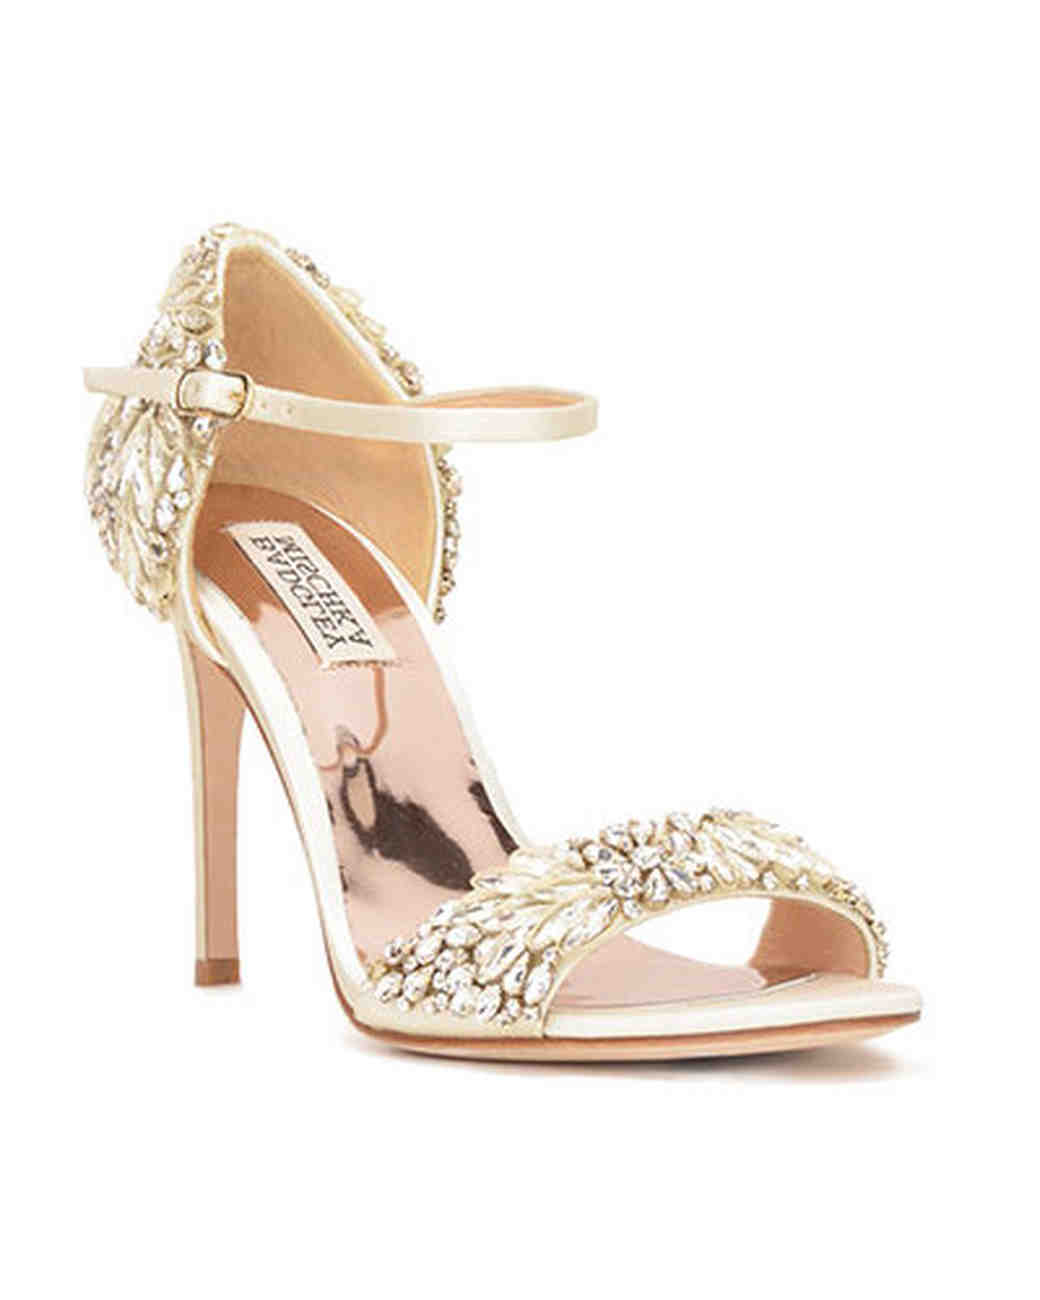 Sparkly Wedding Shoes For The Bride Who Wants To Make A Statement